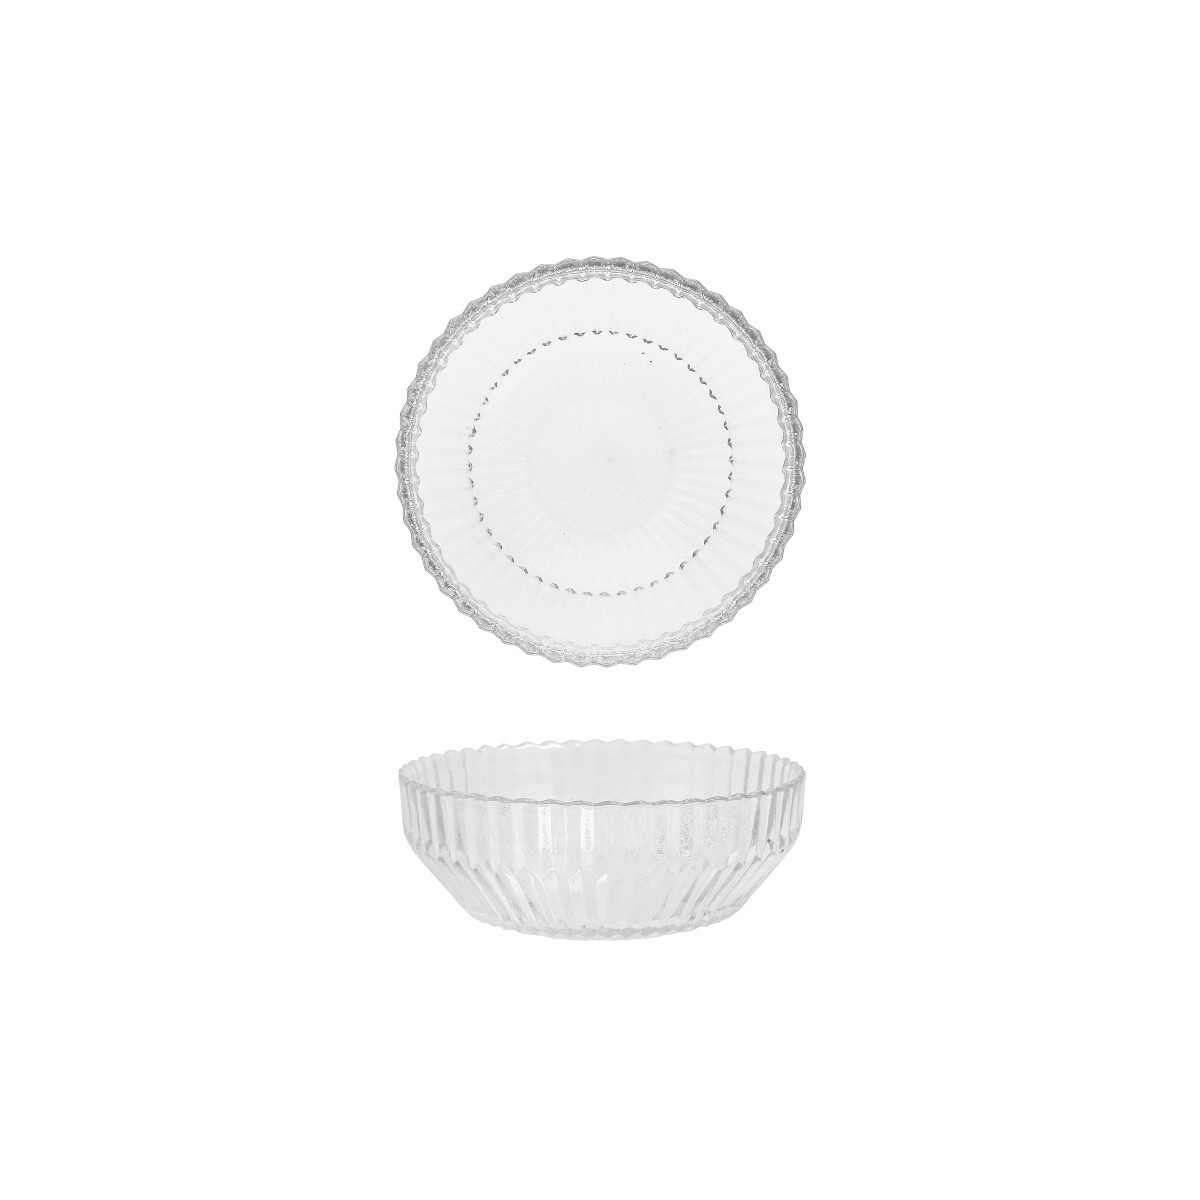 Archie Individual Bowl, Clear, Set of 4